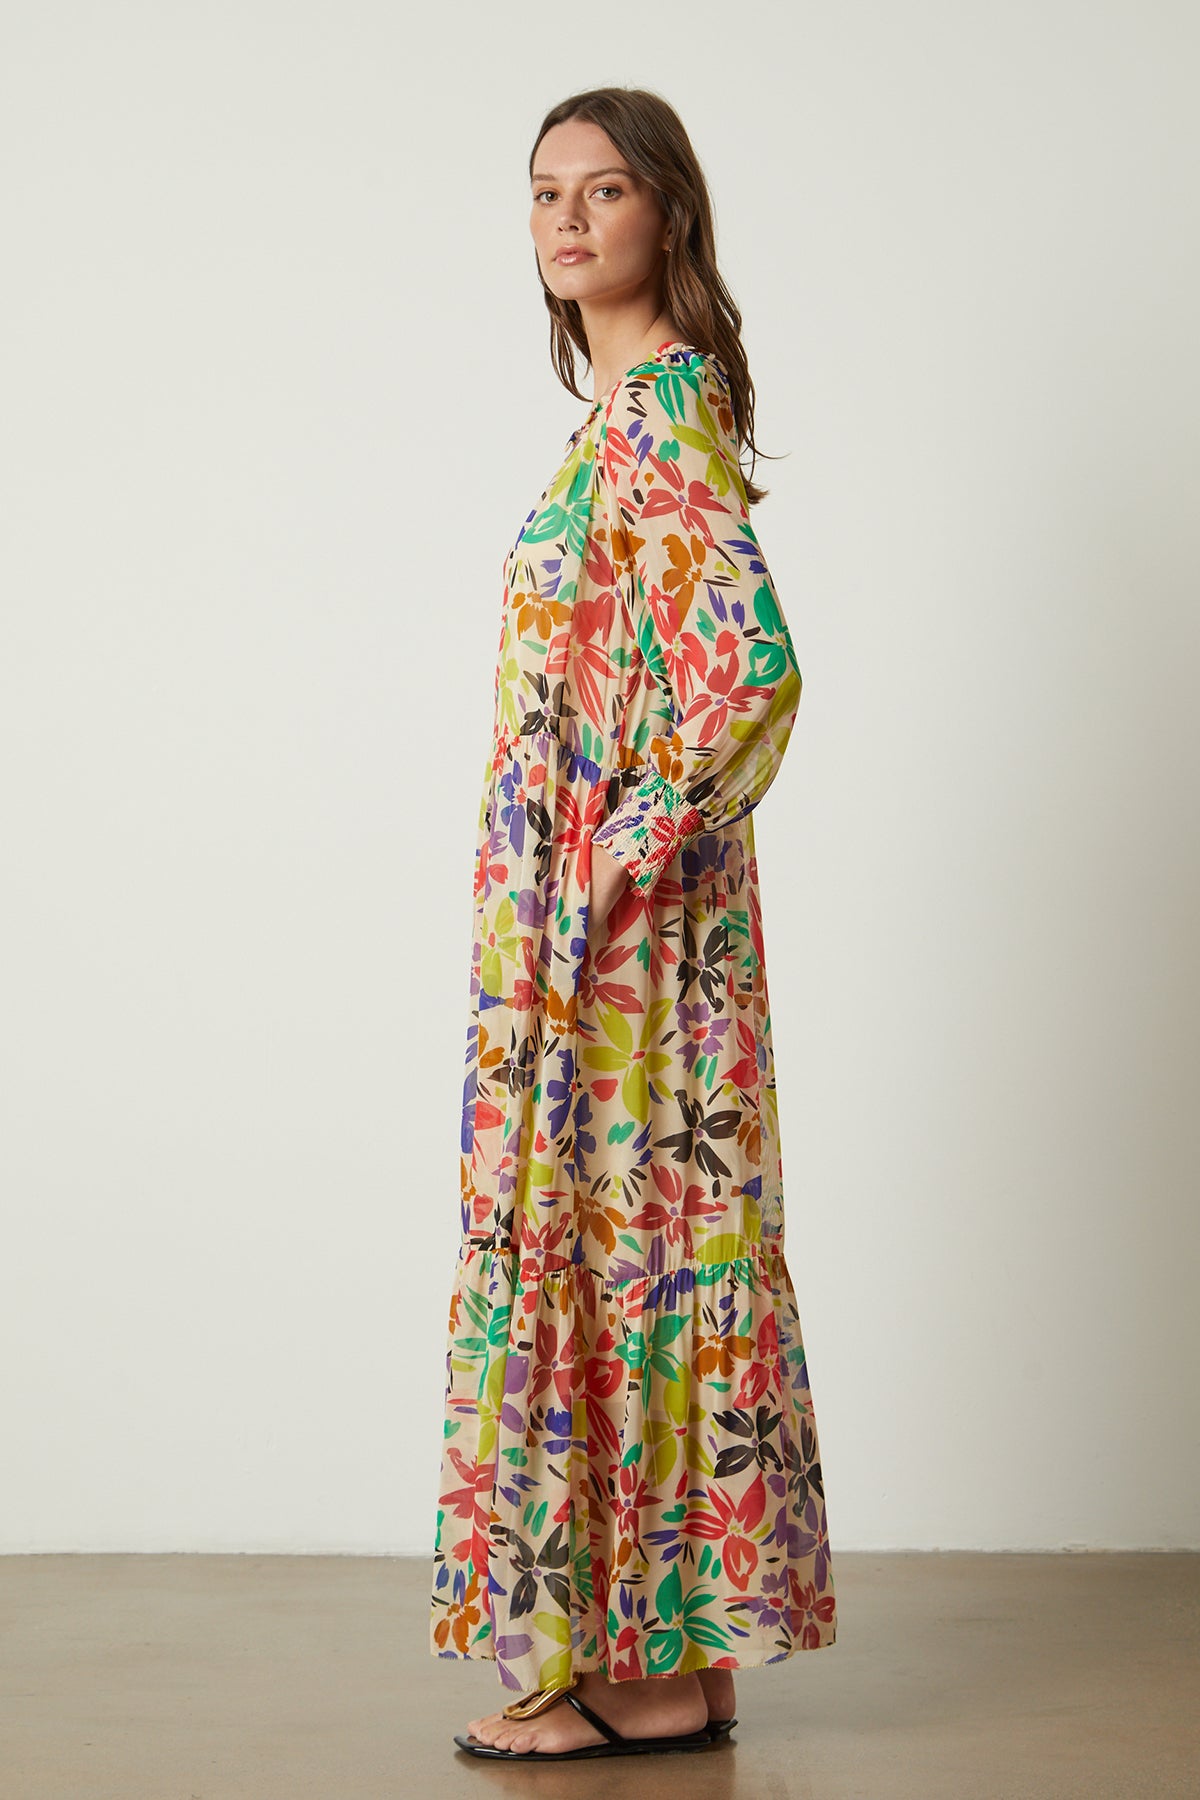 The model is wearing a SERENA PRINTED MAXI DRESS by Velvet by Graham & Spencer.-26022624723137